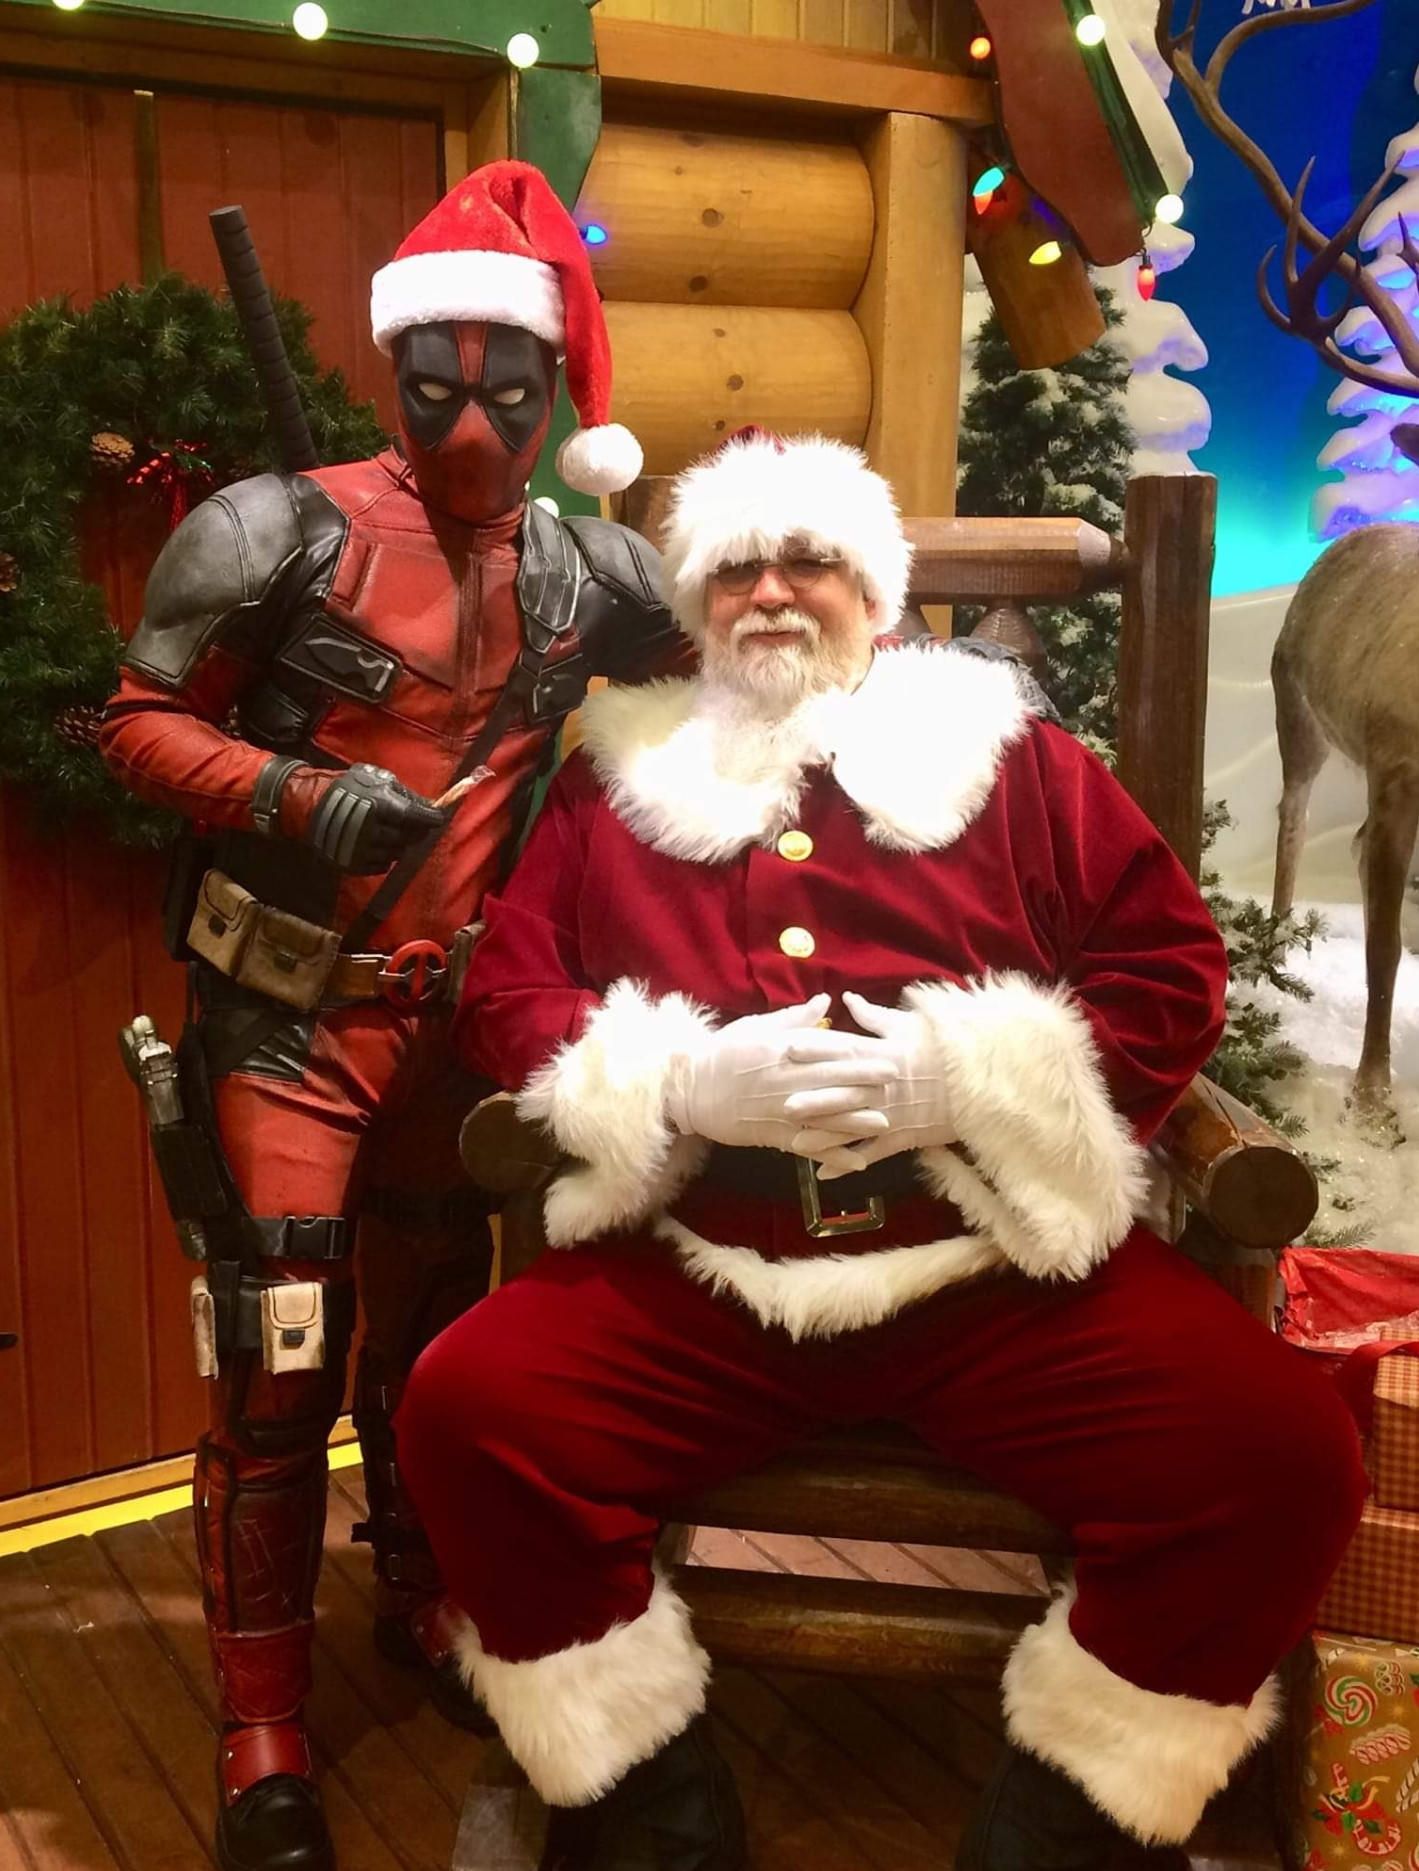 My friend is Santa at Bass Pro . He had an unexpected visitor.